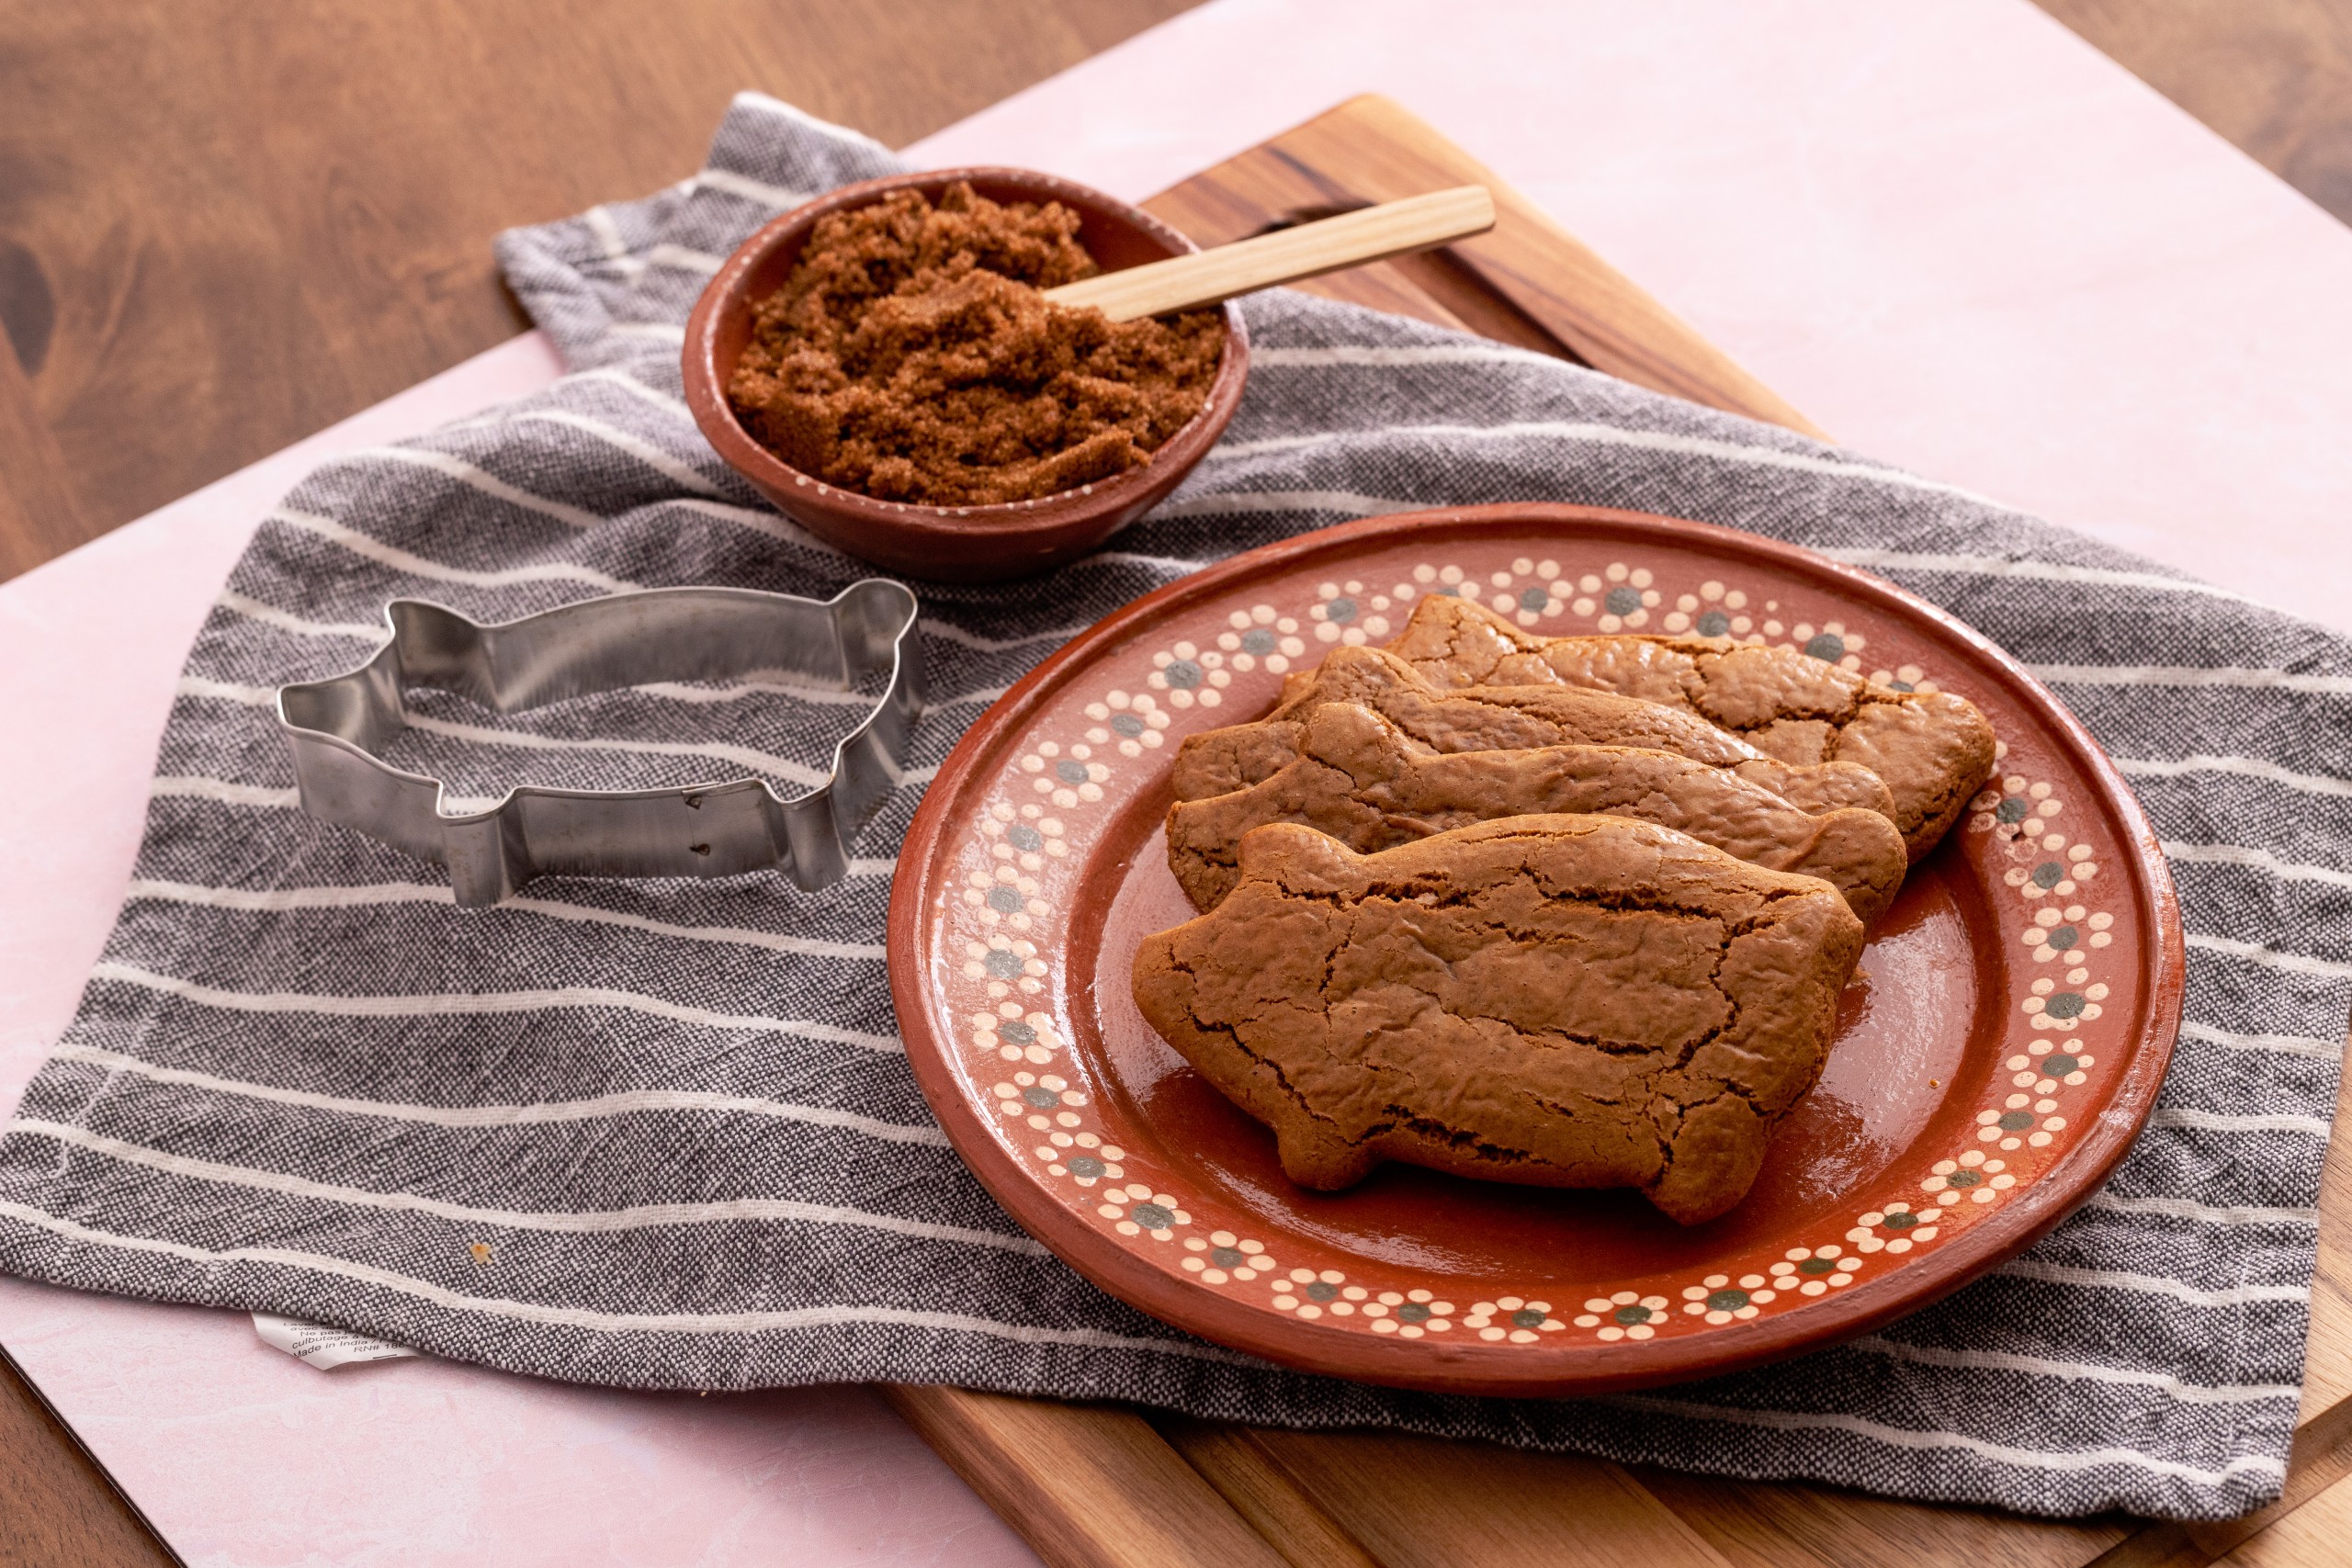 Marranitos a pan dulce, made from ginger, cinnamon, dark brown sugar and unsulfured molasses can be found in any Mexican bakery. 